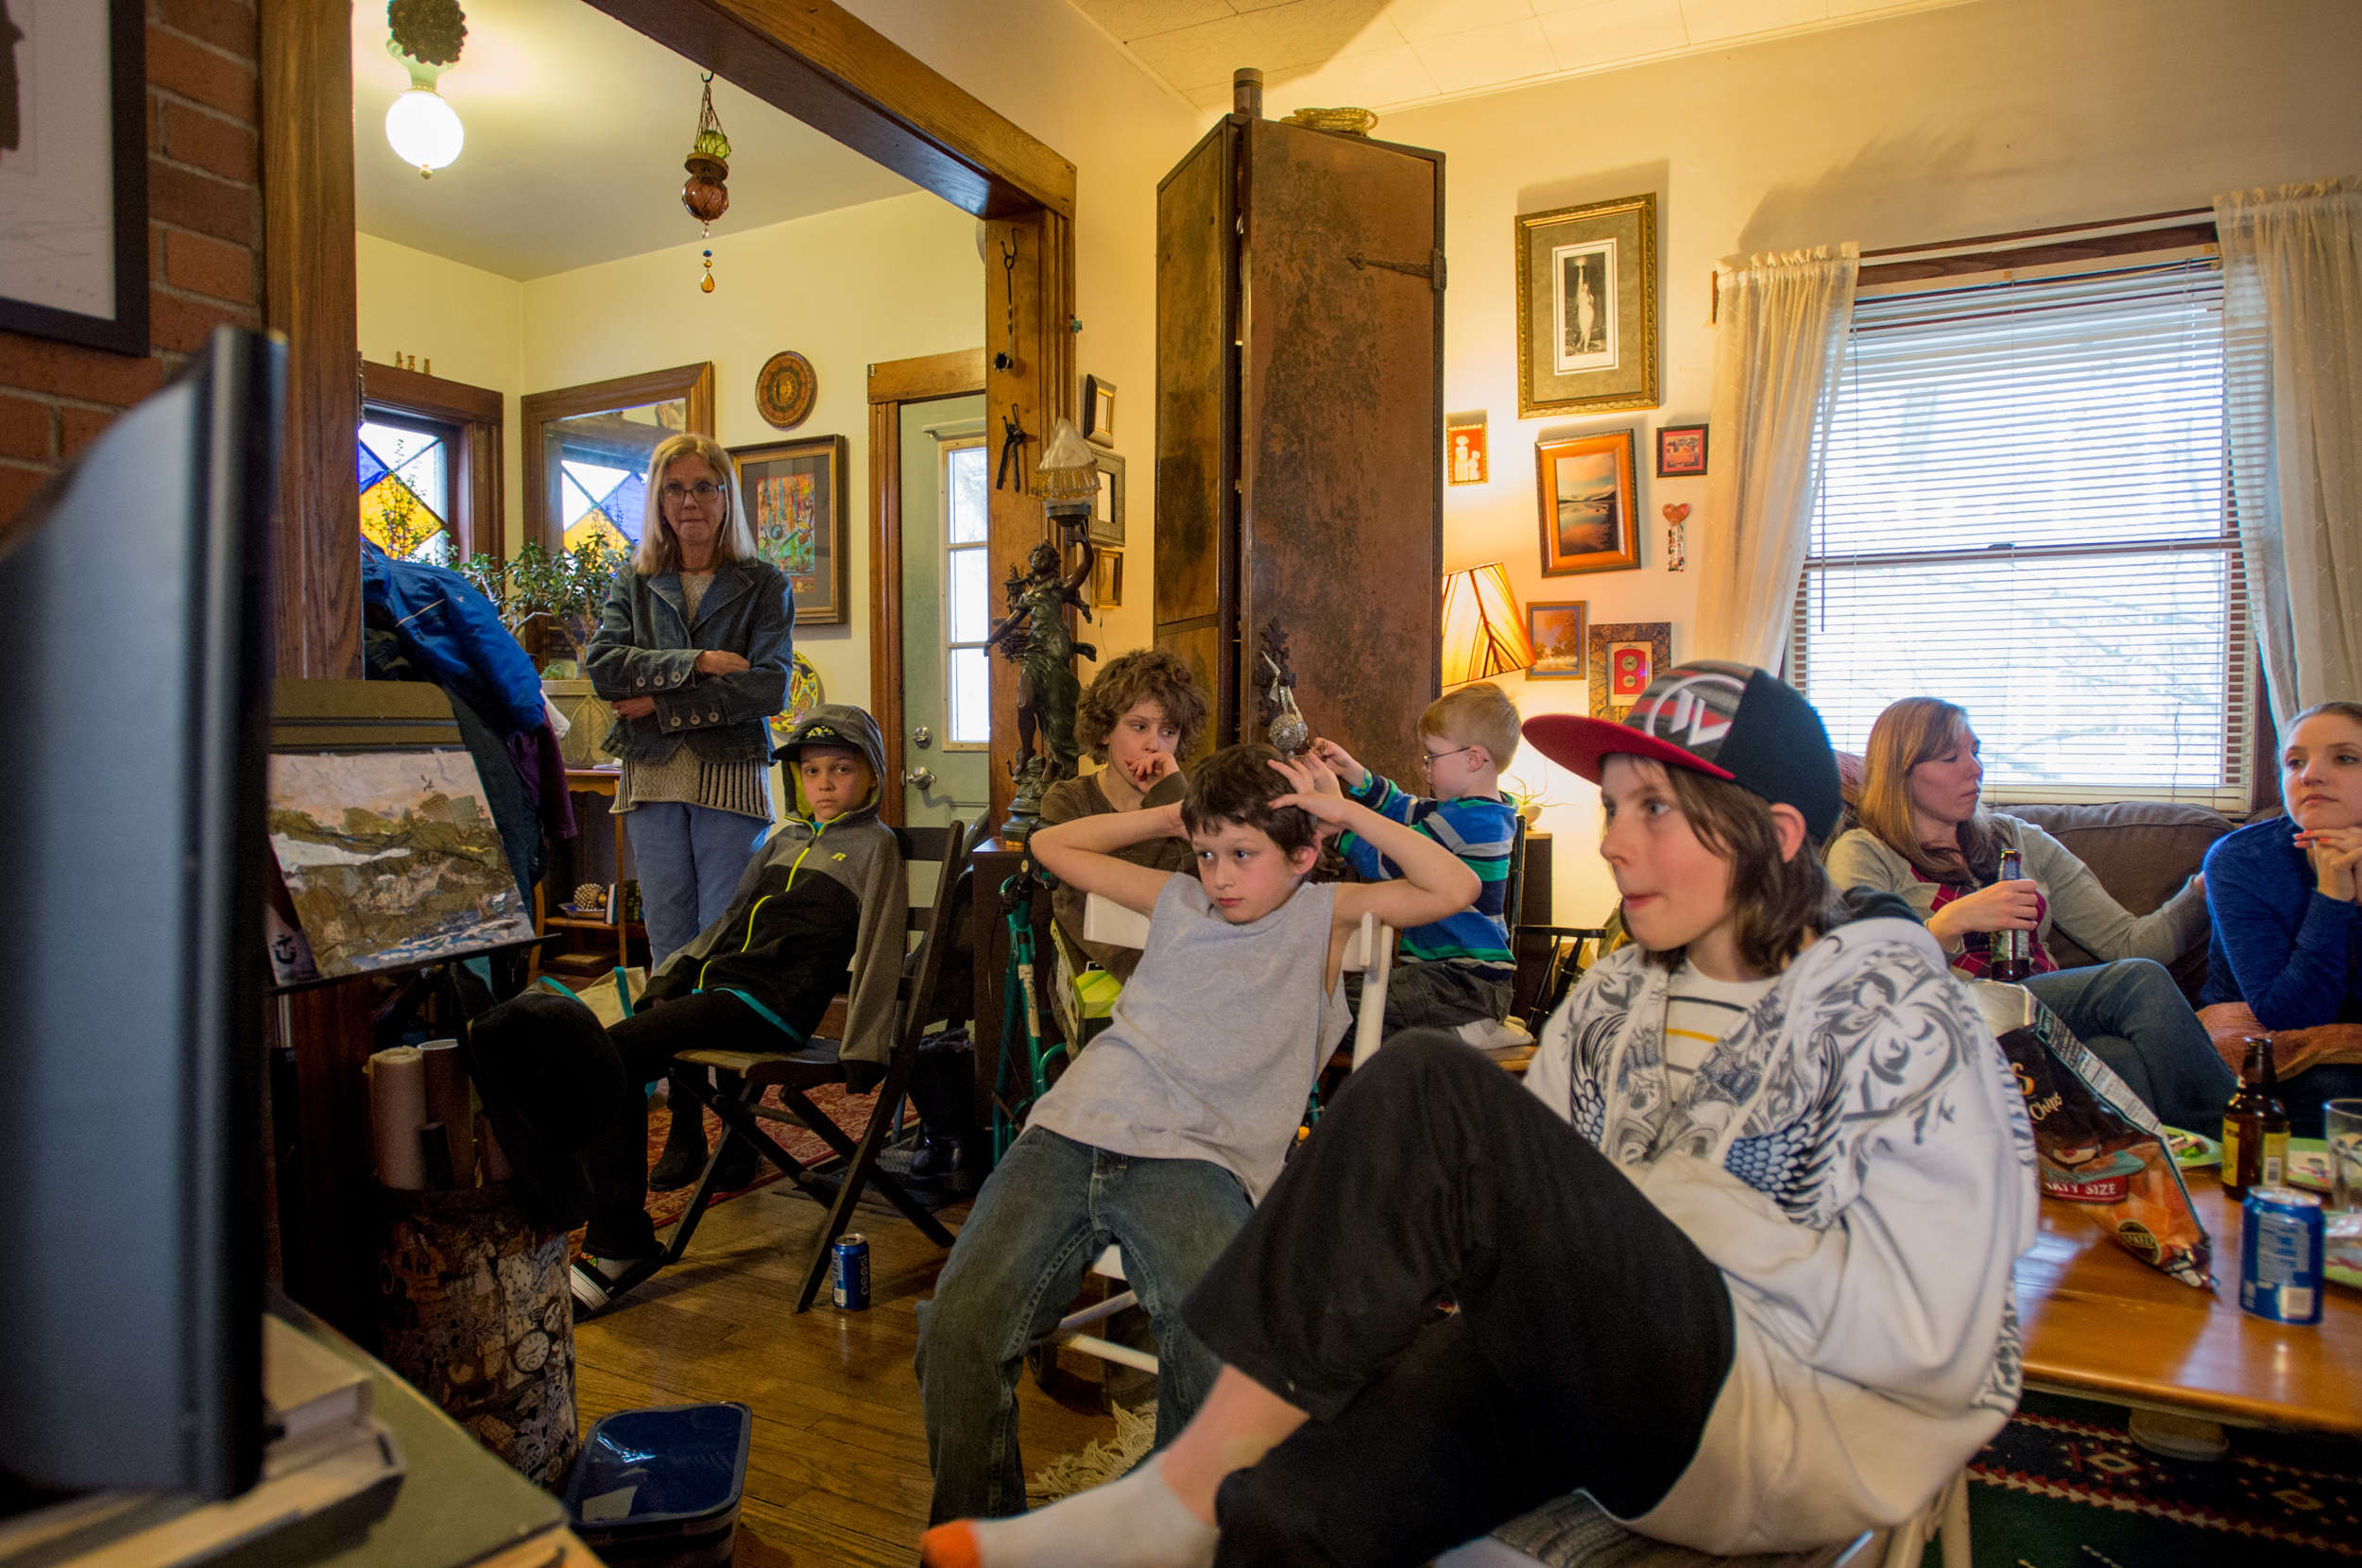  Carol Heveron (far left) watches over her relatives and grandchildren as they watch TV at her house on Easter Sunday. 